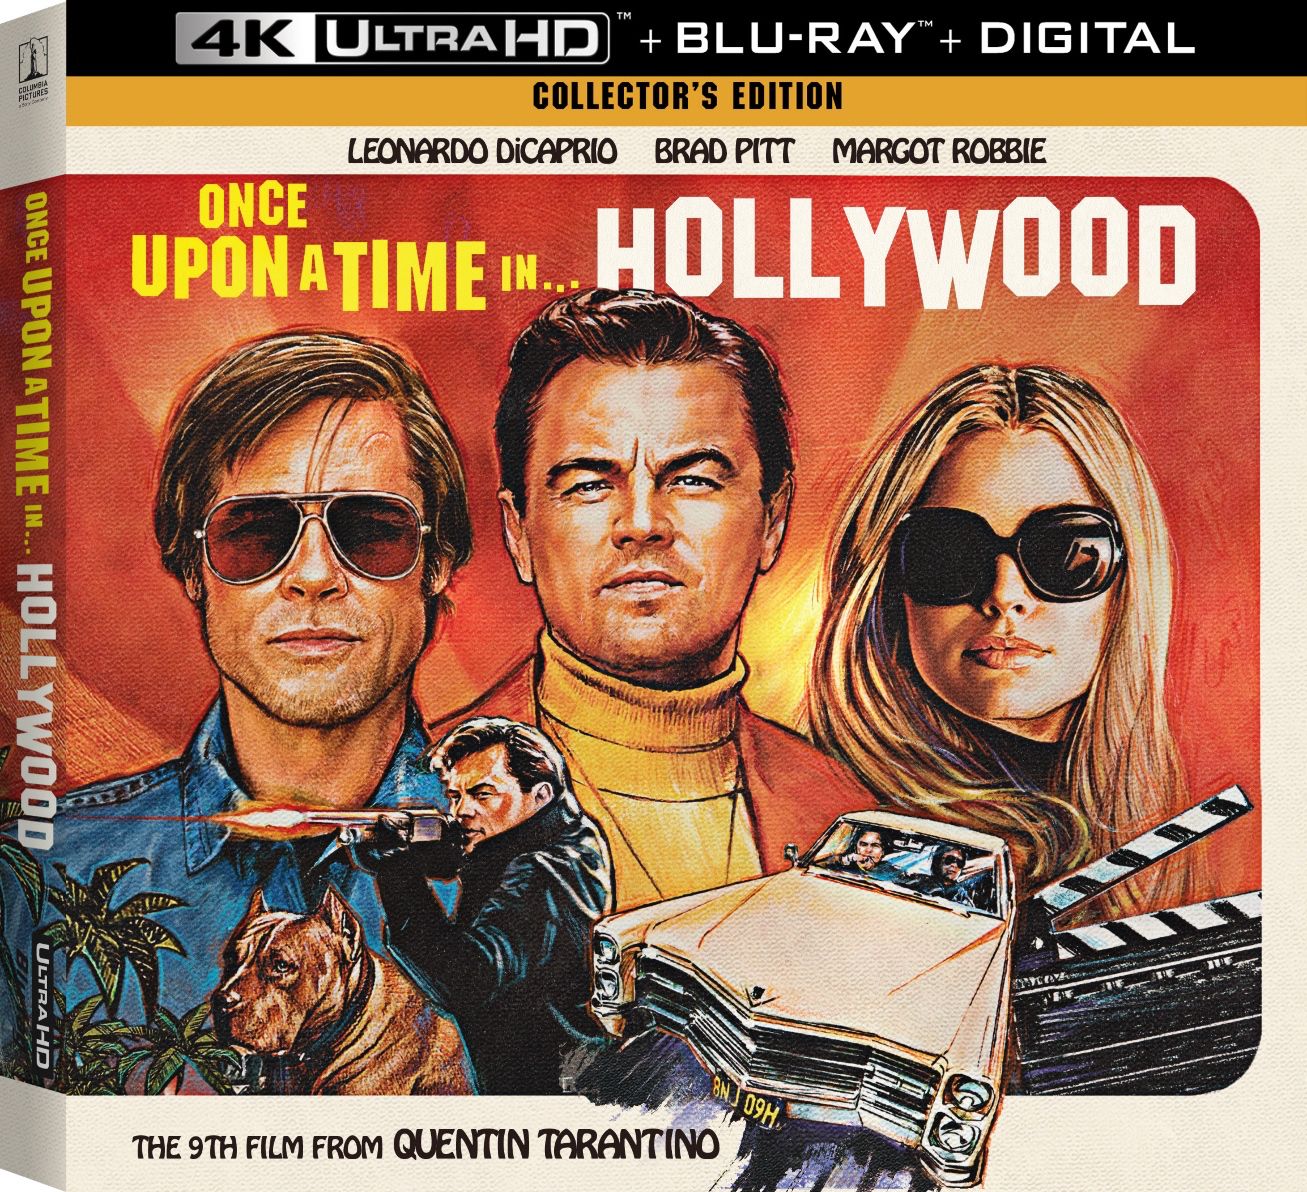 Once Upon a Time in Hollywood 4K Collector's Edition Art #2